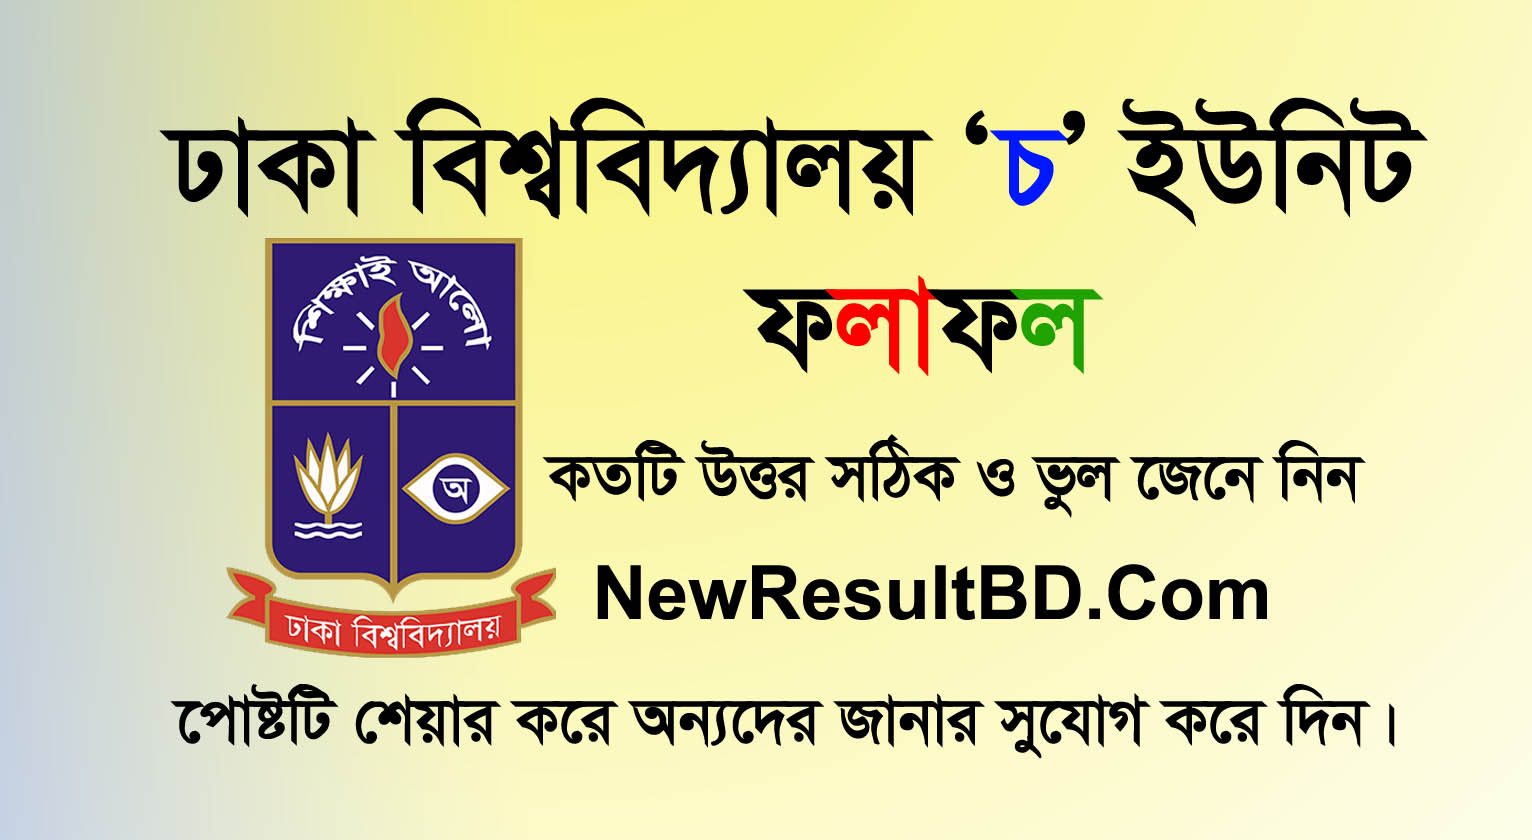 Dhaka University Cha Unit Result 2019 has been published. DU Cha unit MCQ exam result 2019, Dhaka University admission test result for Cha unit is available